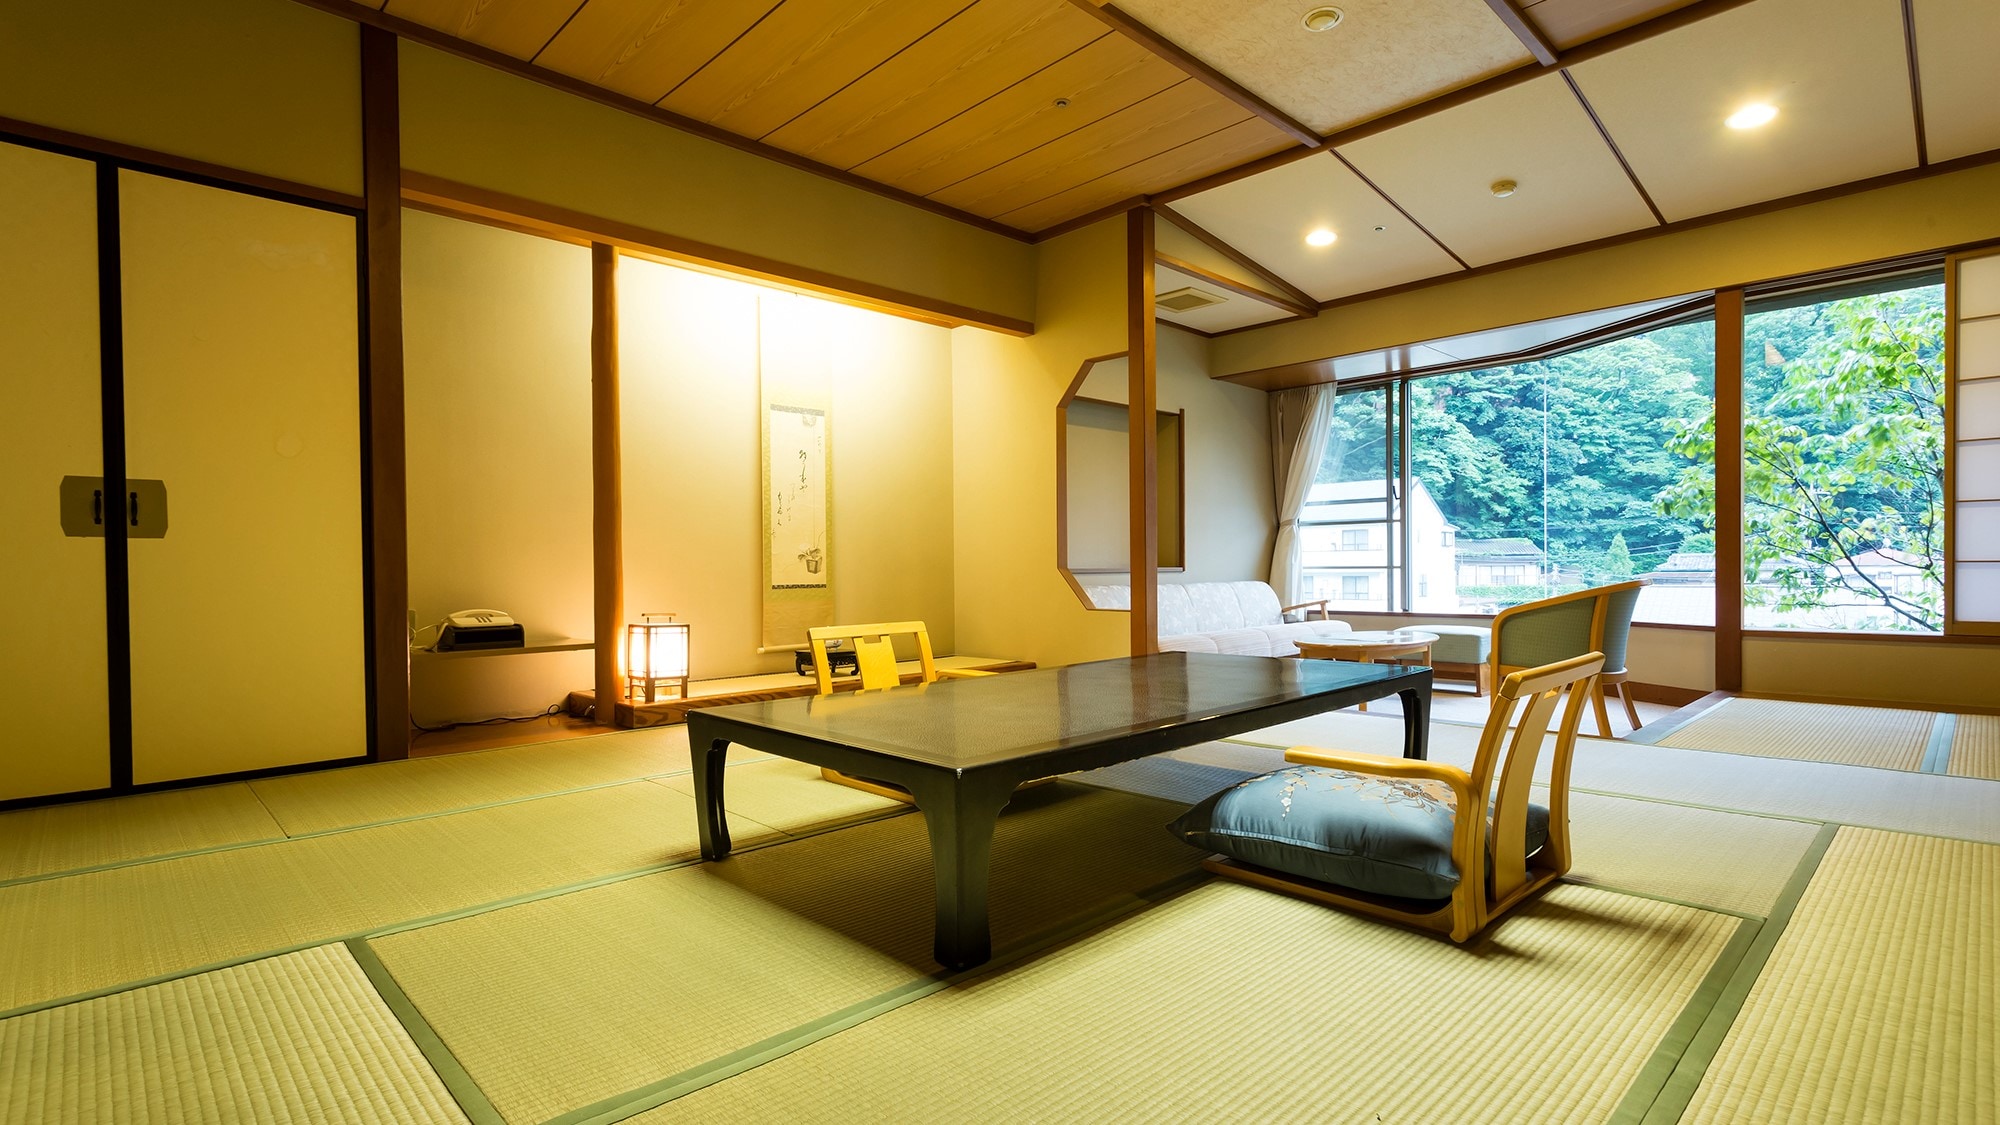 [River side] 12.5 tatami mats, an example of a spacious Japanese-style room